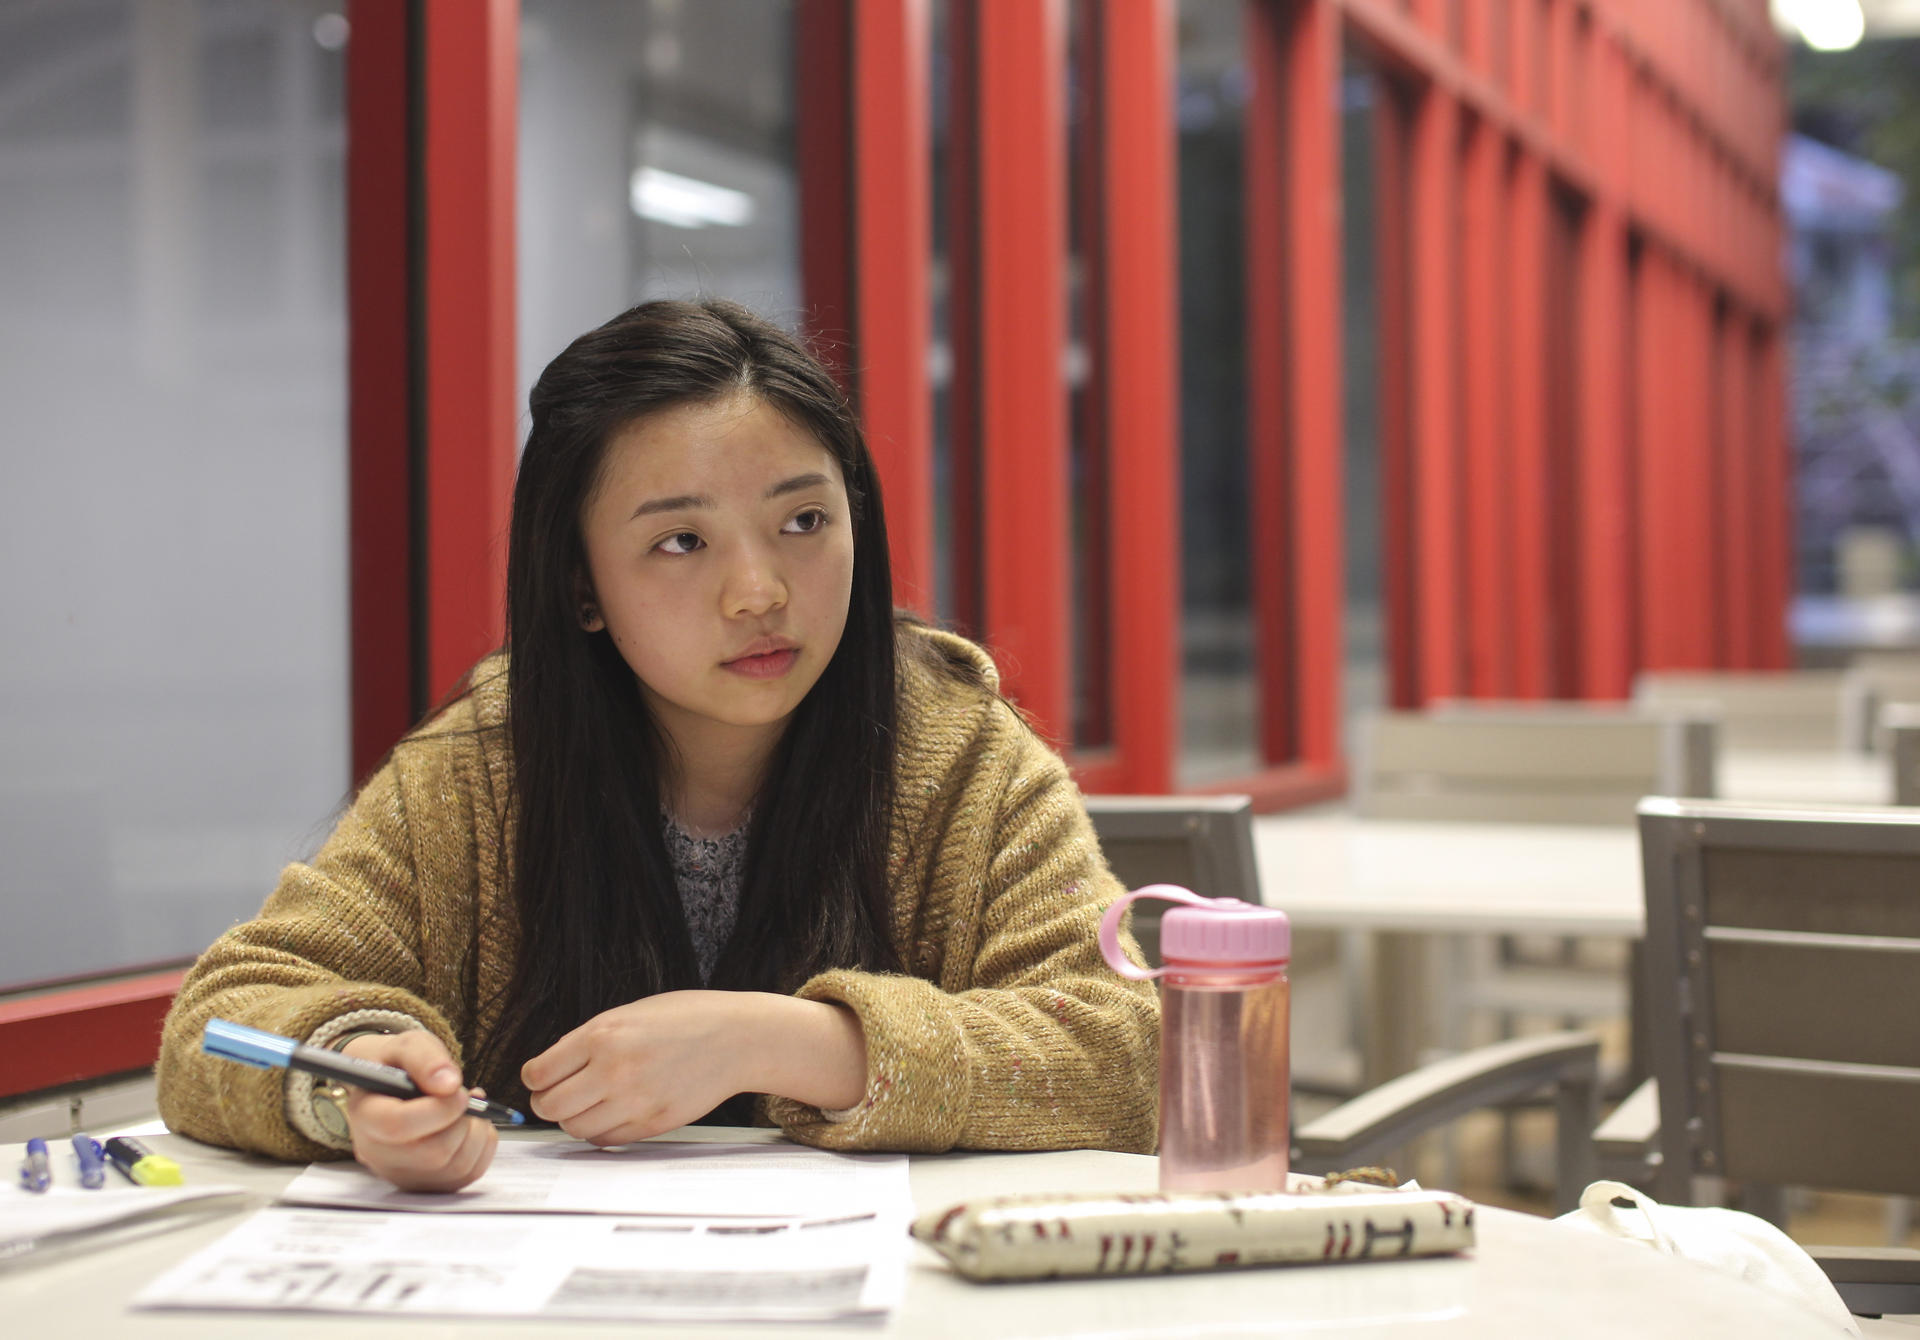 Winnie Lee, 18, studies for her HKDSE exams. Students say that study periods away from school bring them extra stress because they miss the support of classmates and teachers. Photo: Paul Yeung